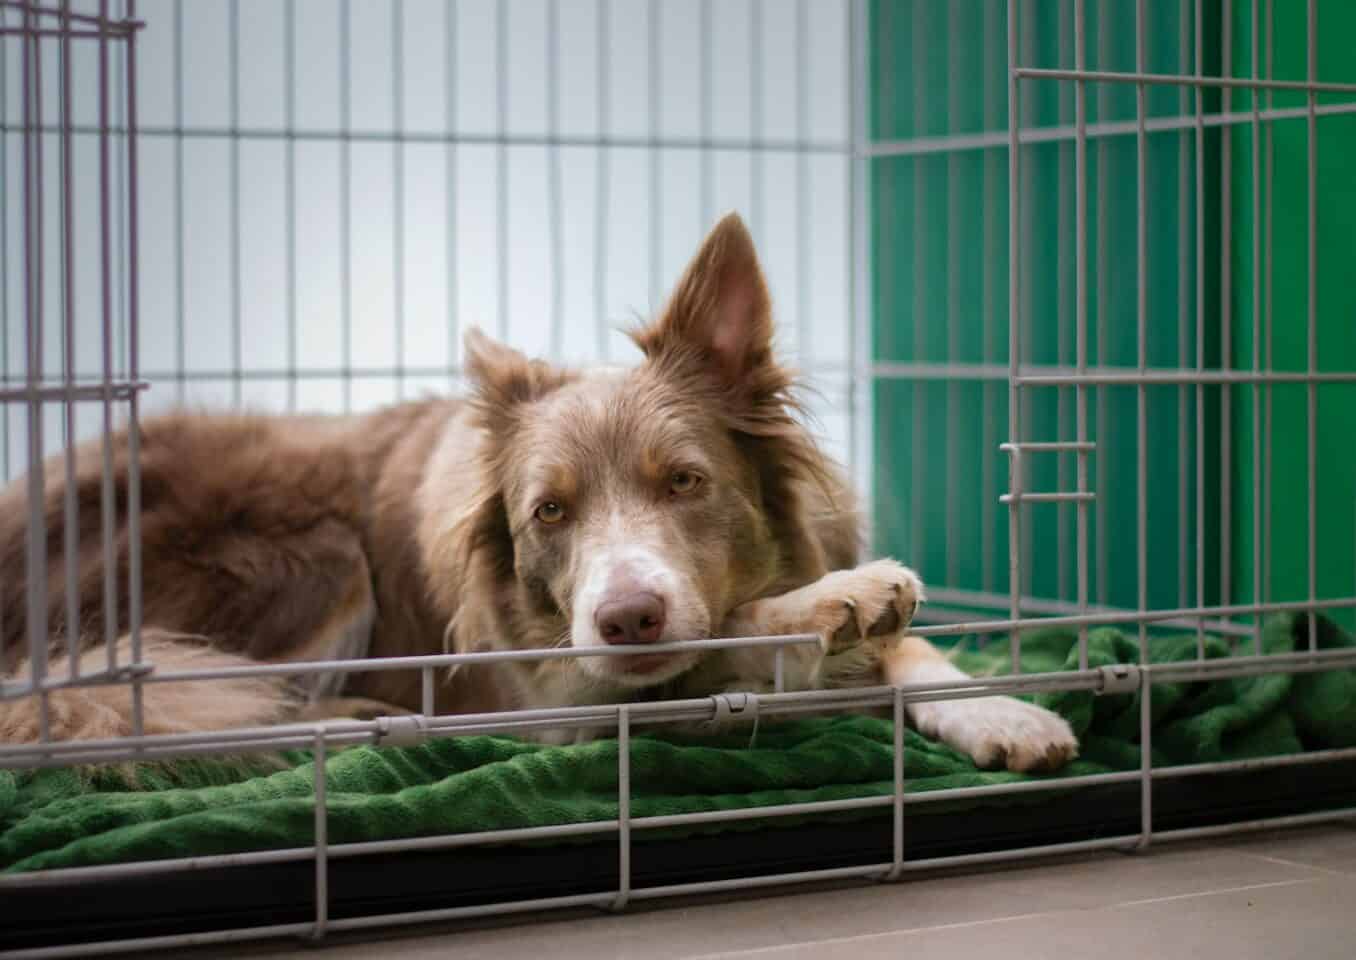 brown dog lying in metal crate kennel